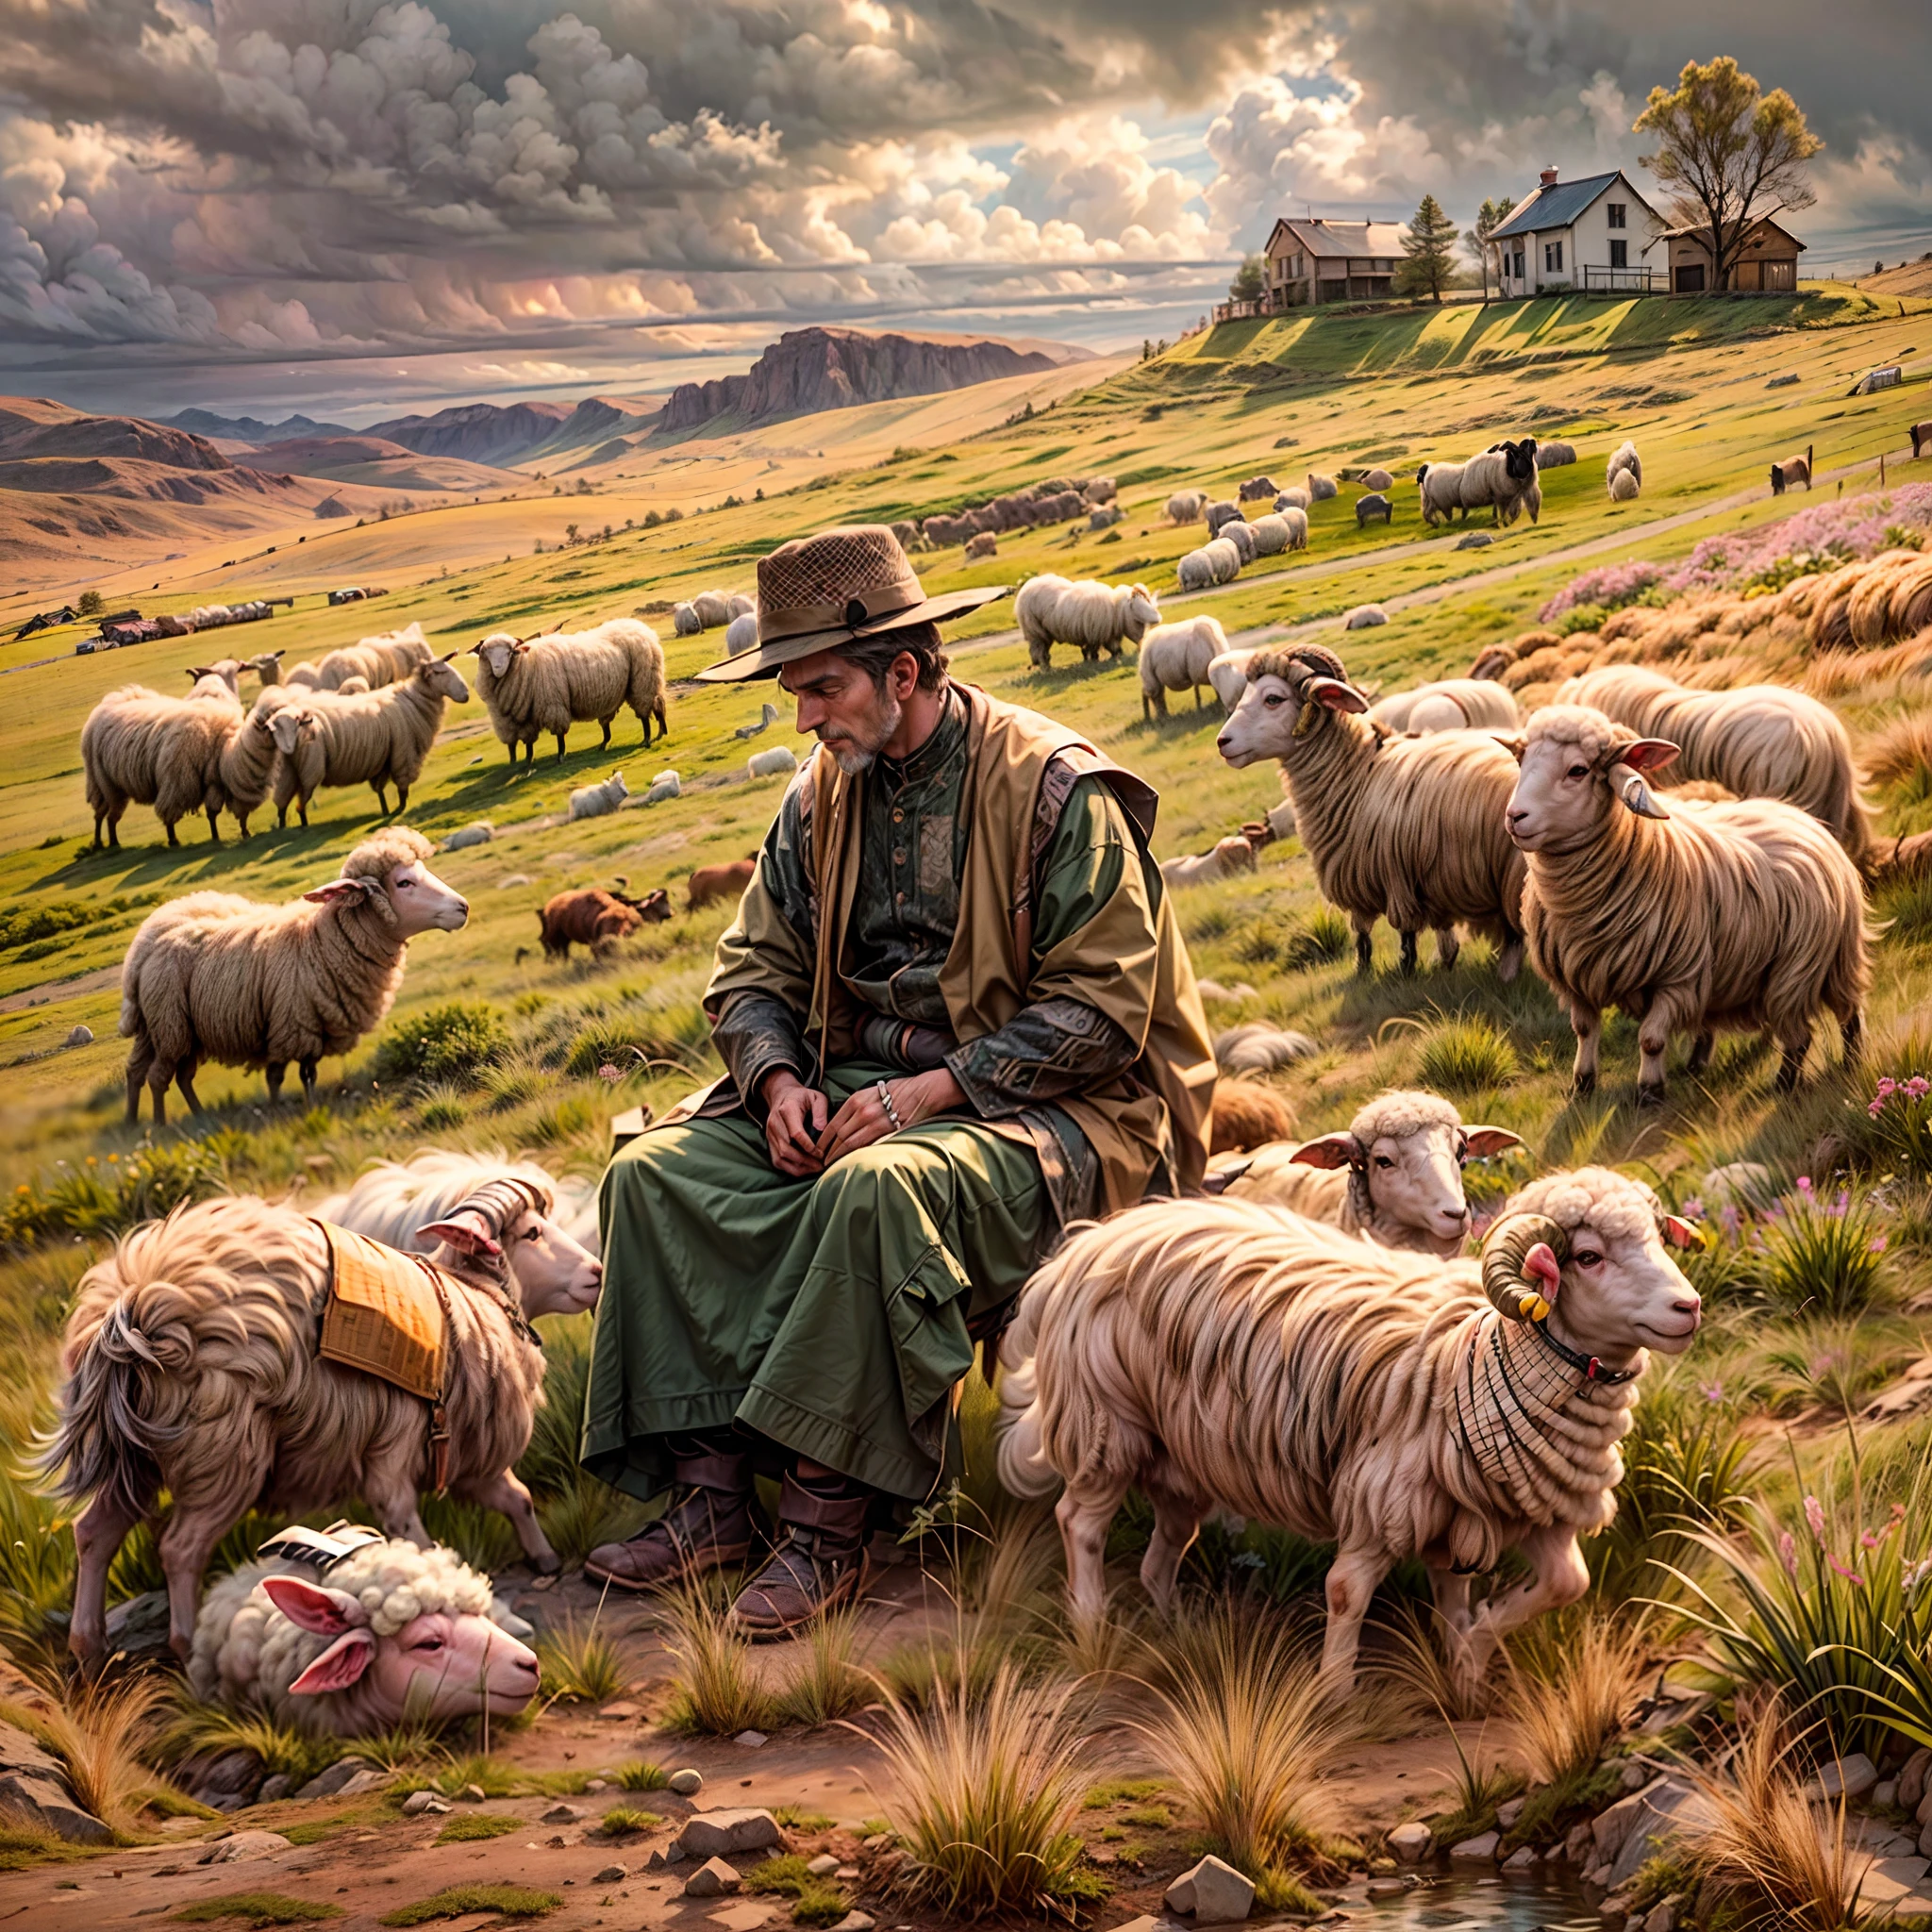 Hyperdetailed illustration, pastoral landscape, vivid imagery conveying a sense of isolation and loneliness, A ((pastoralist)) in his remote and desolate surroundings, (Shepard's crook), flaxen sky, ((bloated sheep lay)) in his field, desolation and decay, (tiny schoolhouse in the distance), PsyAI, BREAK 

(At that time the sheep called to him From their wormy bellies, as they Lay bloating in the field. He was A pastoralist, The schoolhouse hardly handsize In a sky of flax.), PsyAI.